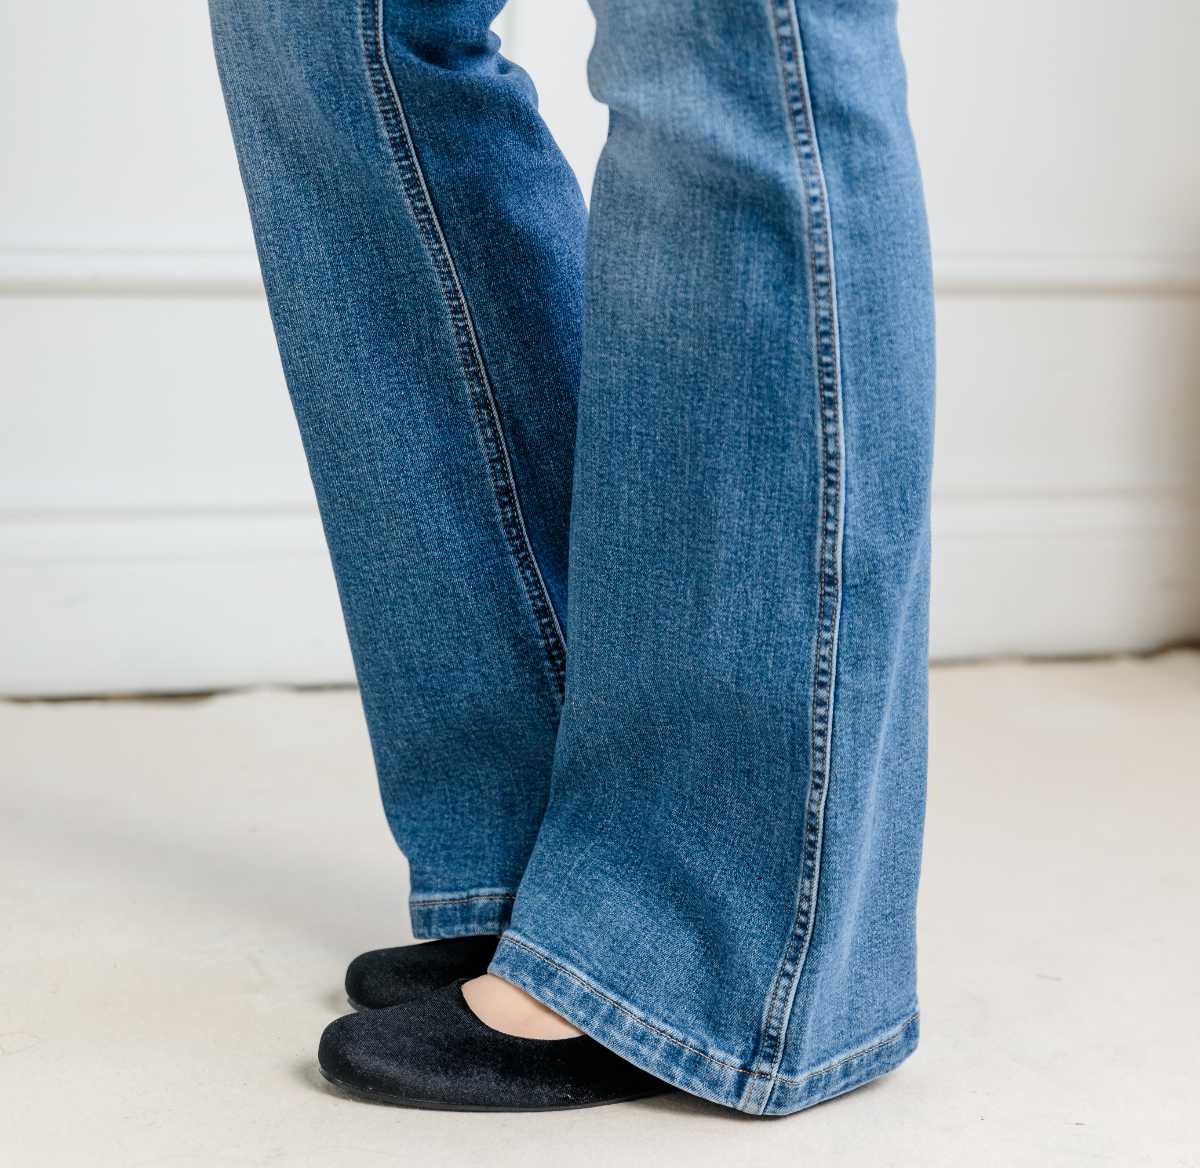 Close of up woman's legs wearing long blue flared jeans with black ballerina flats.